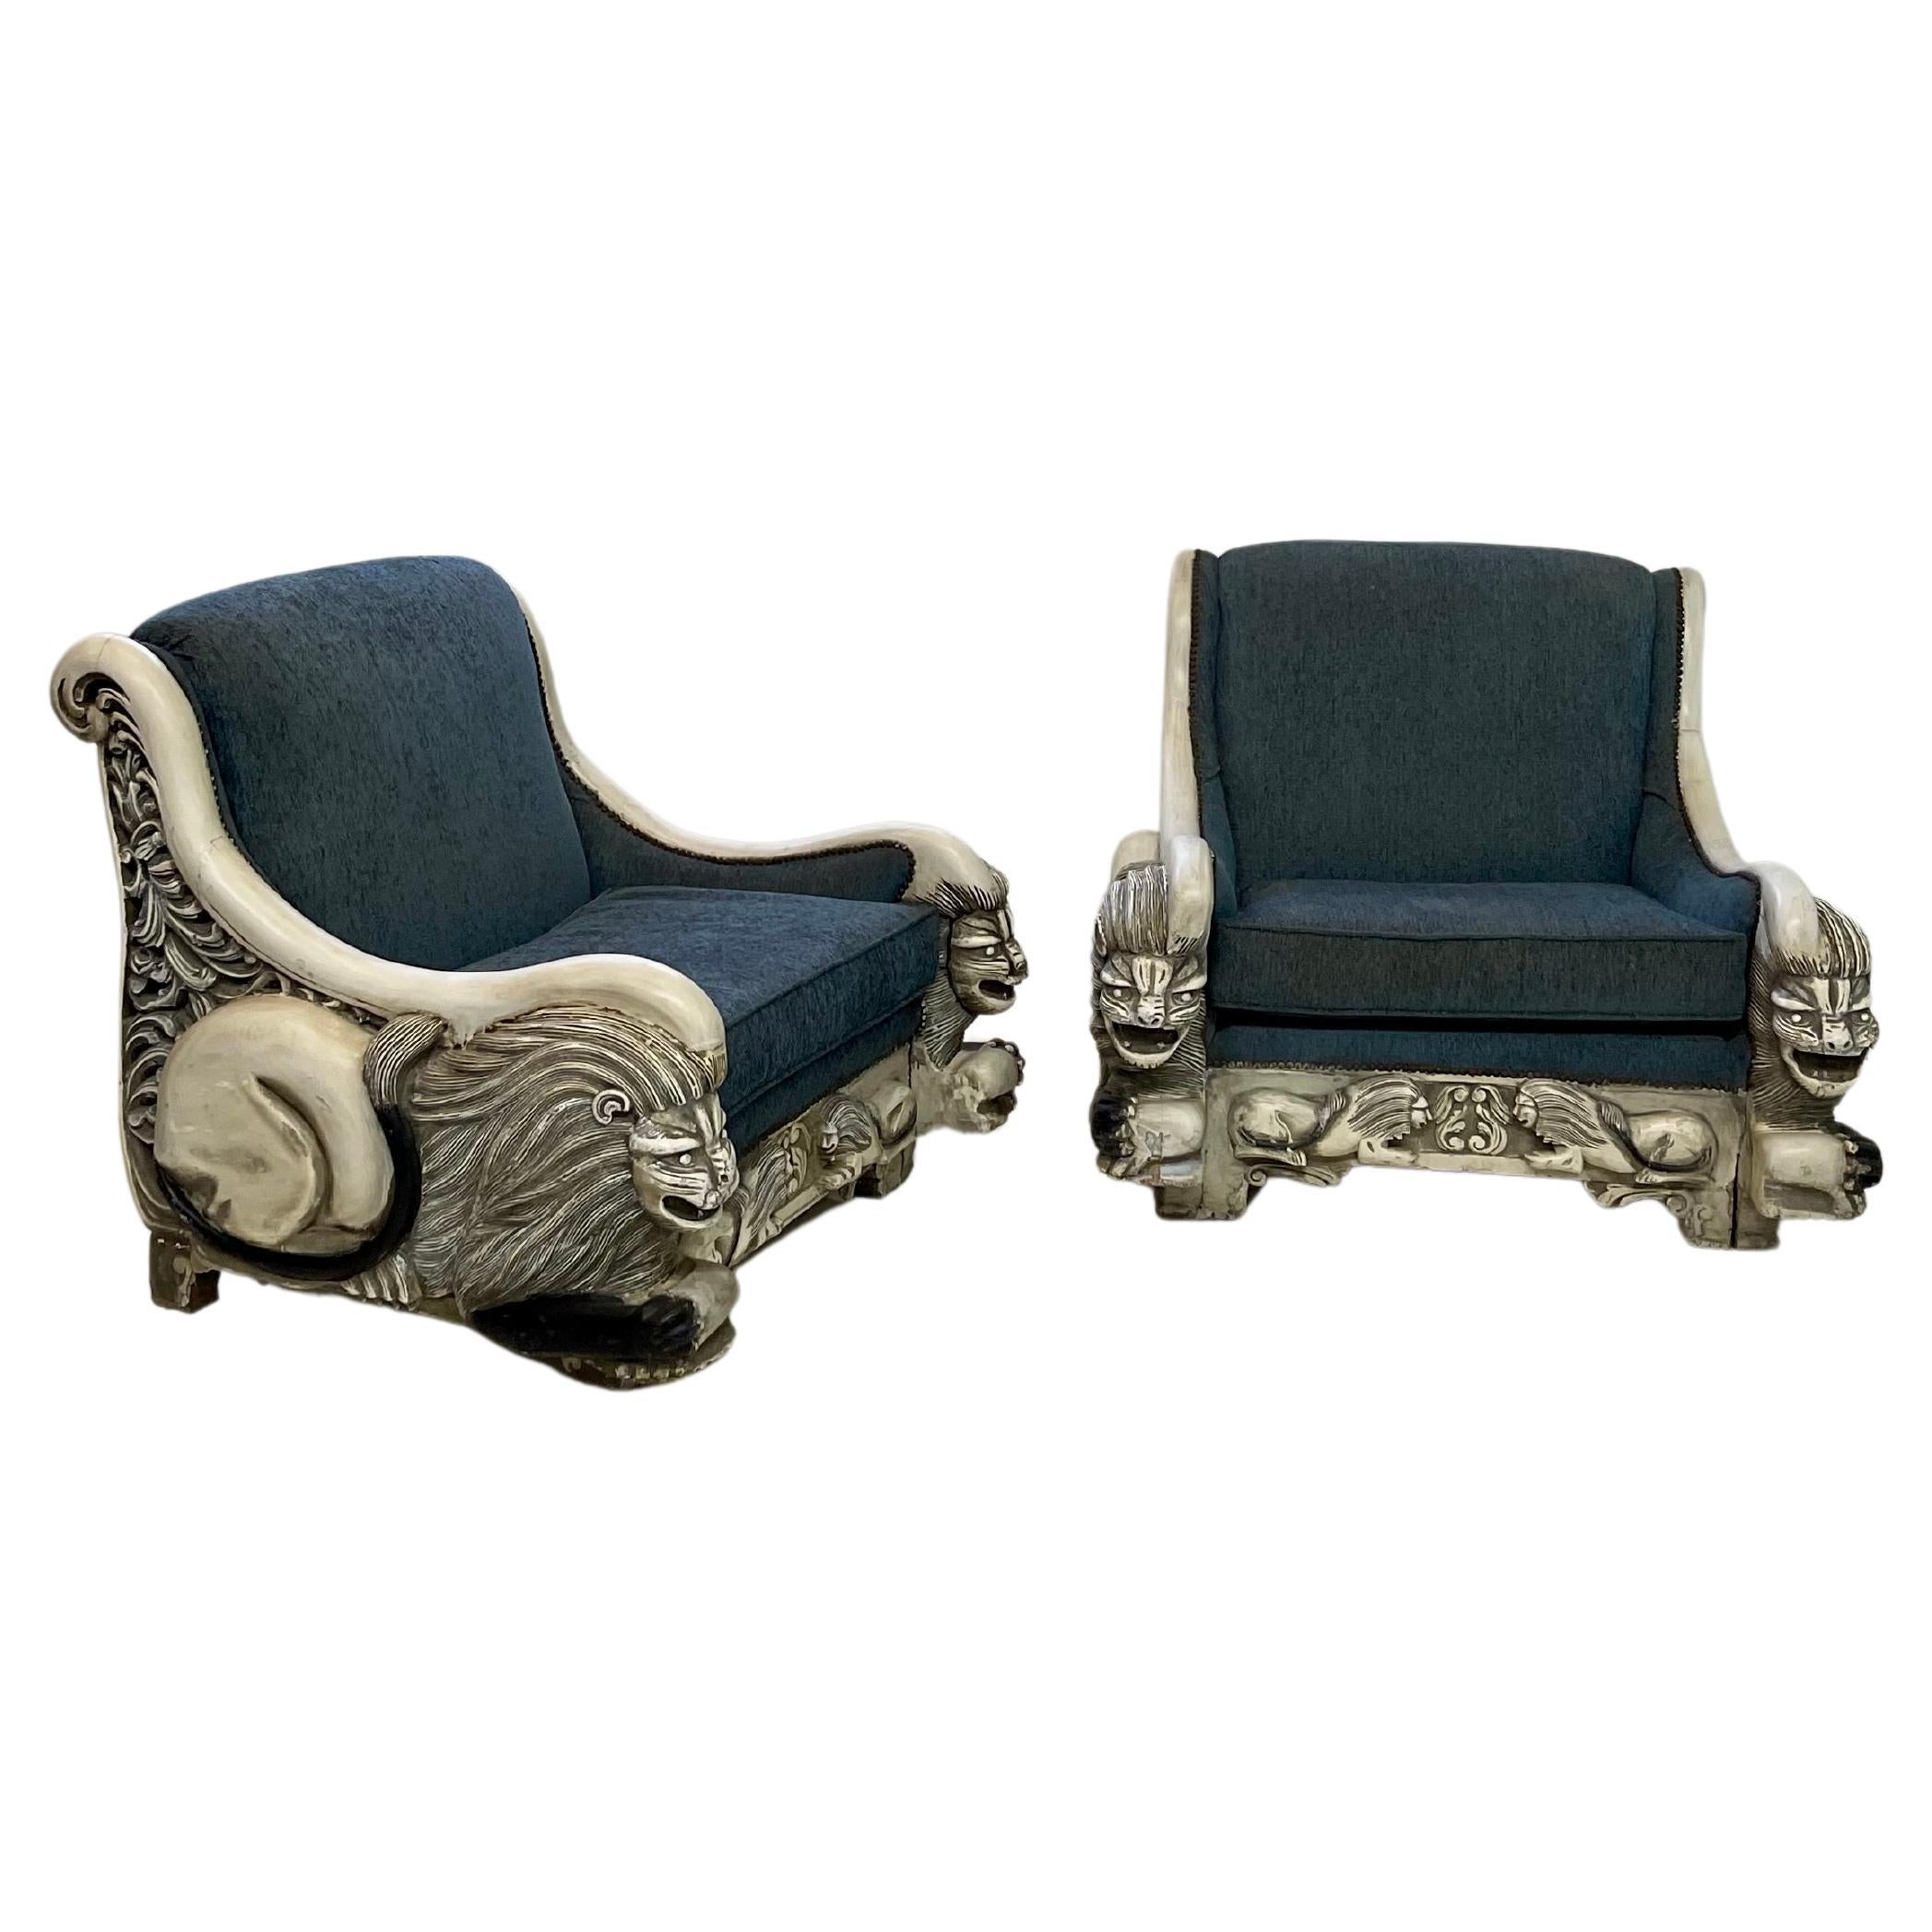 Early 20th Century pair of oversized Italian Art Deco lounge chairs with intricately detailed reclined lion carvings on each arm and in miniature along the front center apron. The chair frames are in a black and white painted finish and comfortably